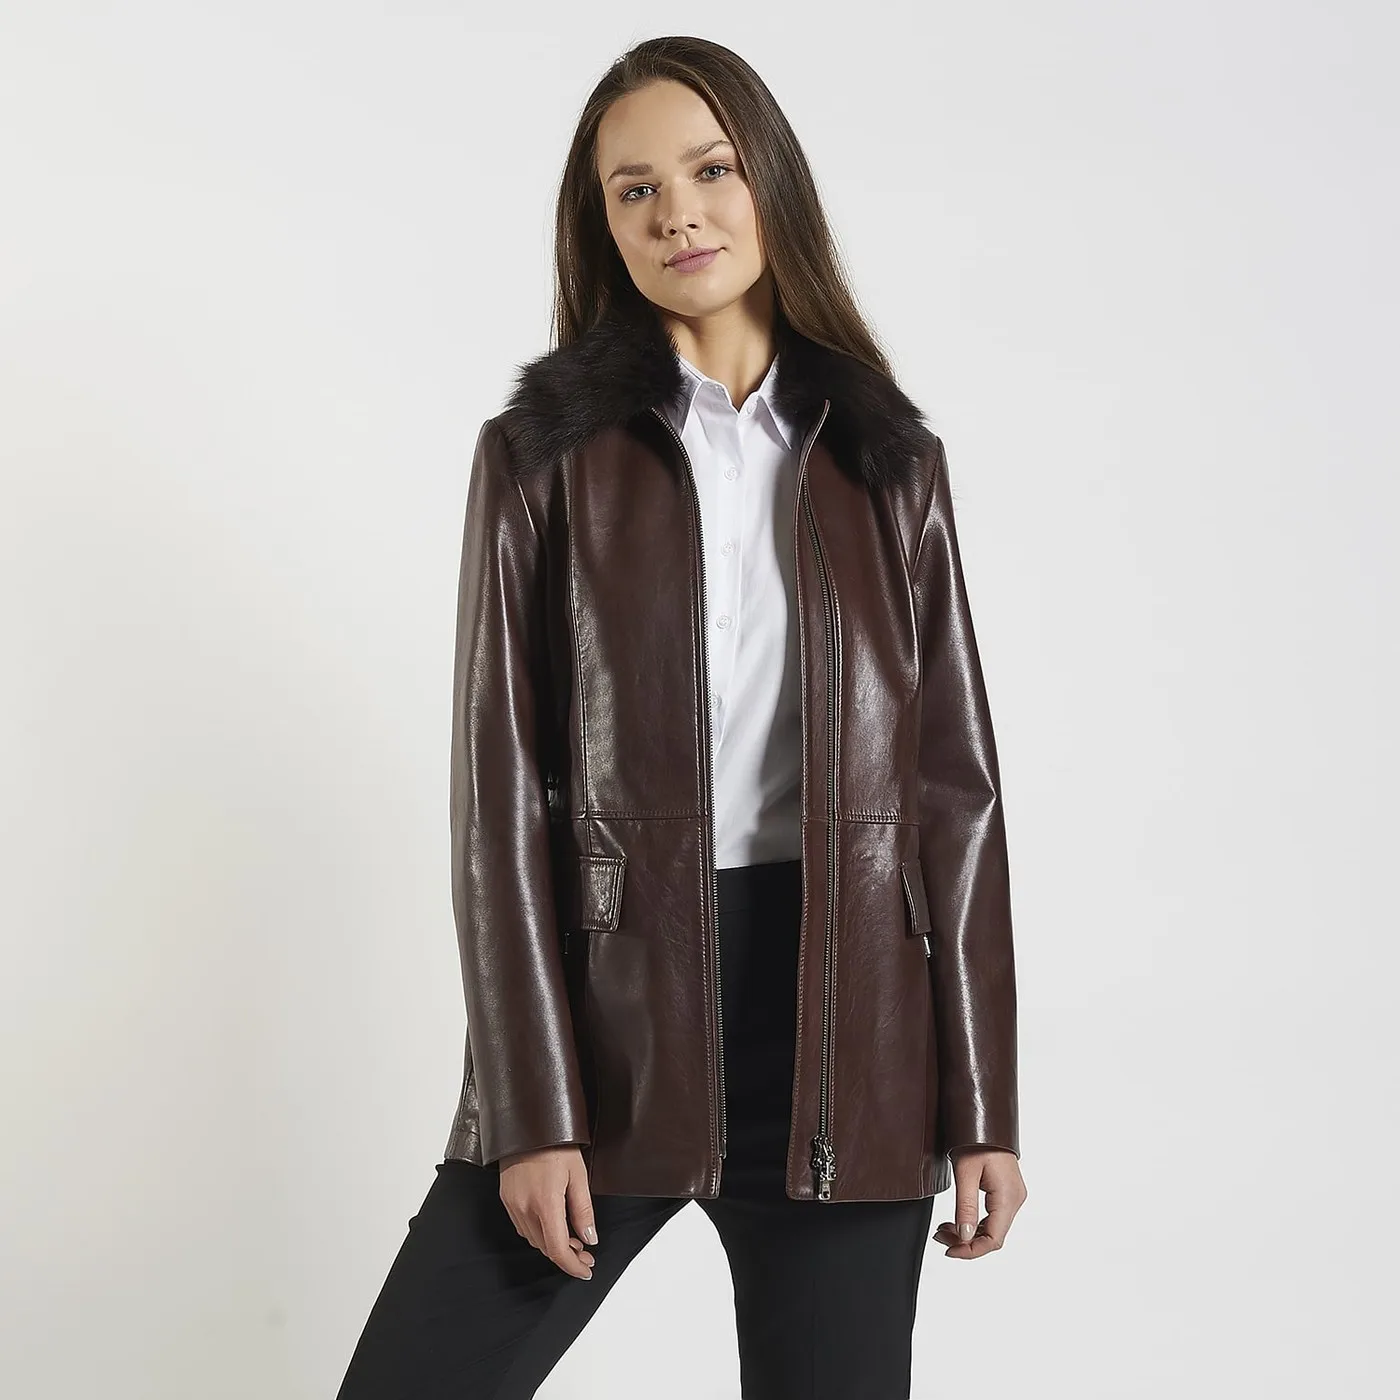 Genuine Sheep Leather Jacket for Women, Black Color Hooded Classic Long Leather Jackets, Leather Goods from Turkey